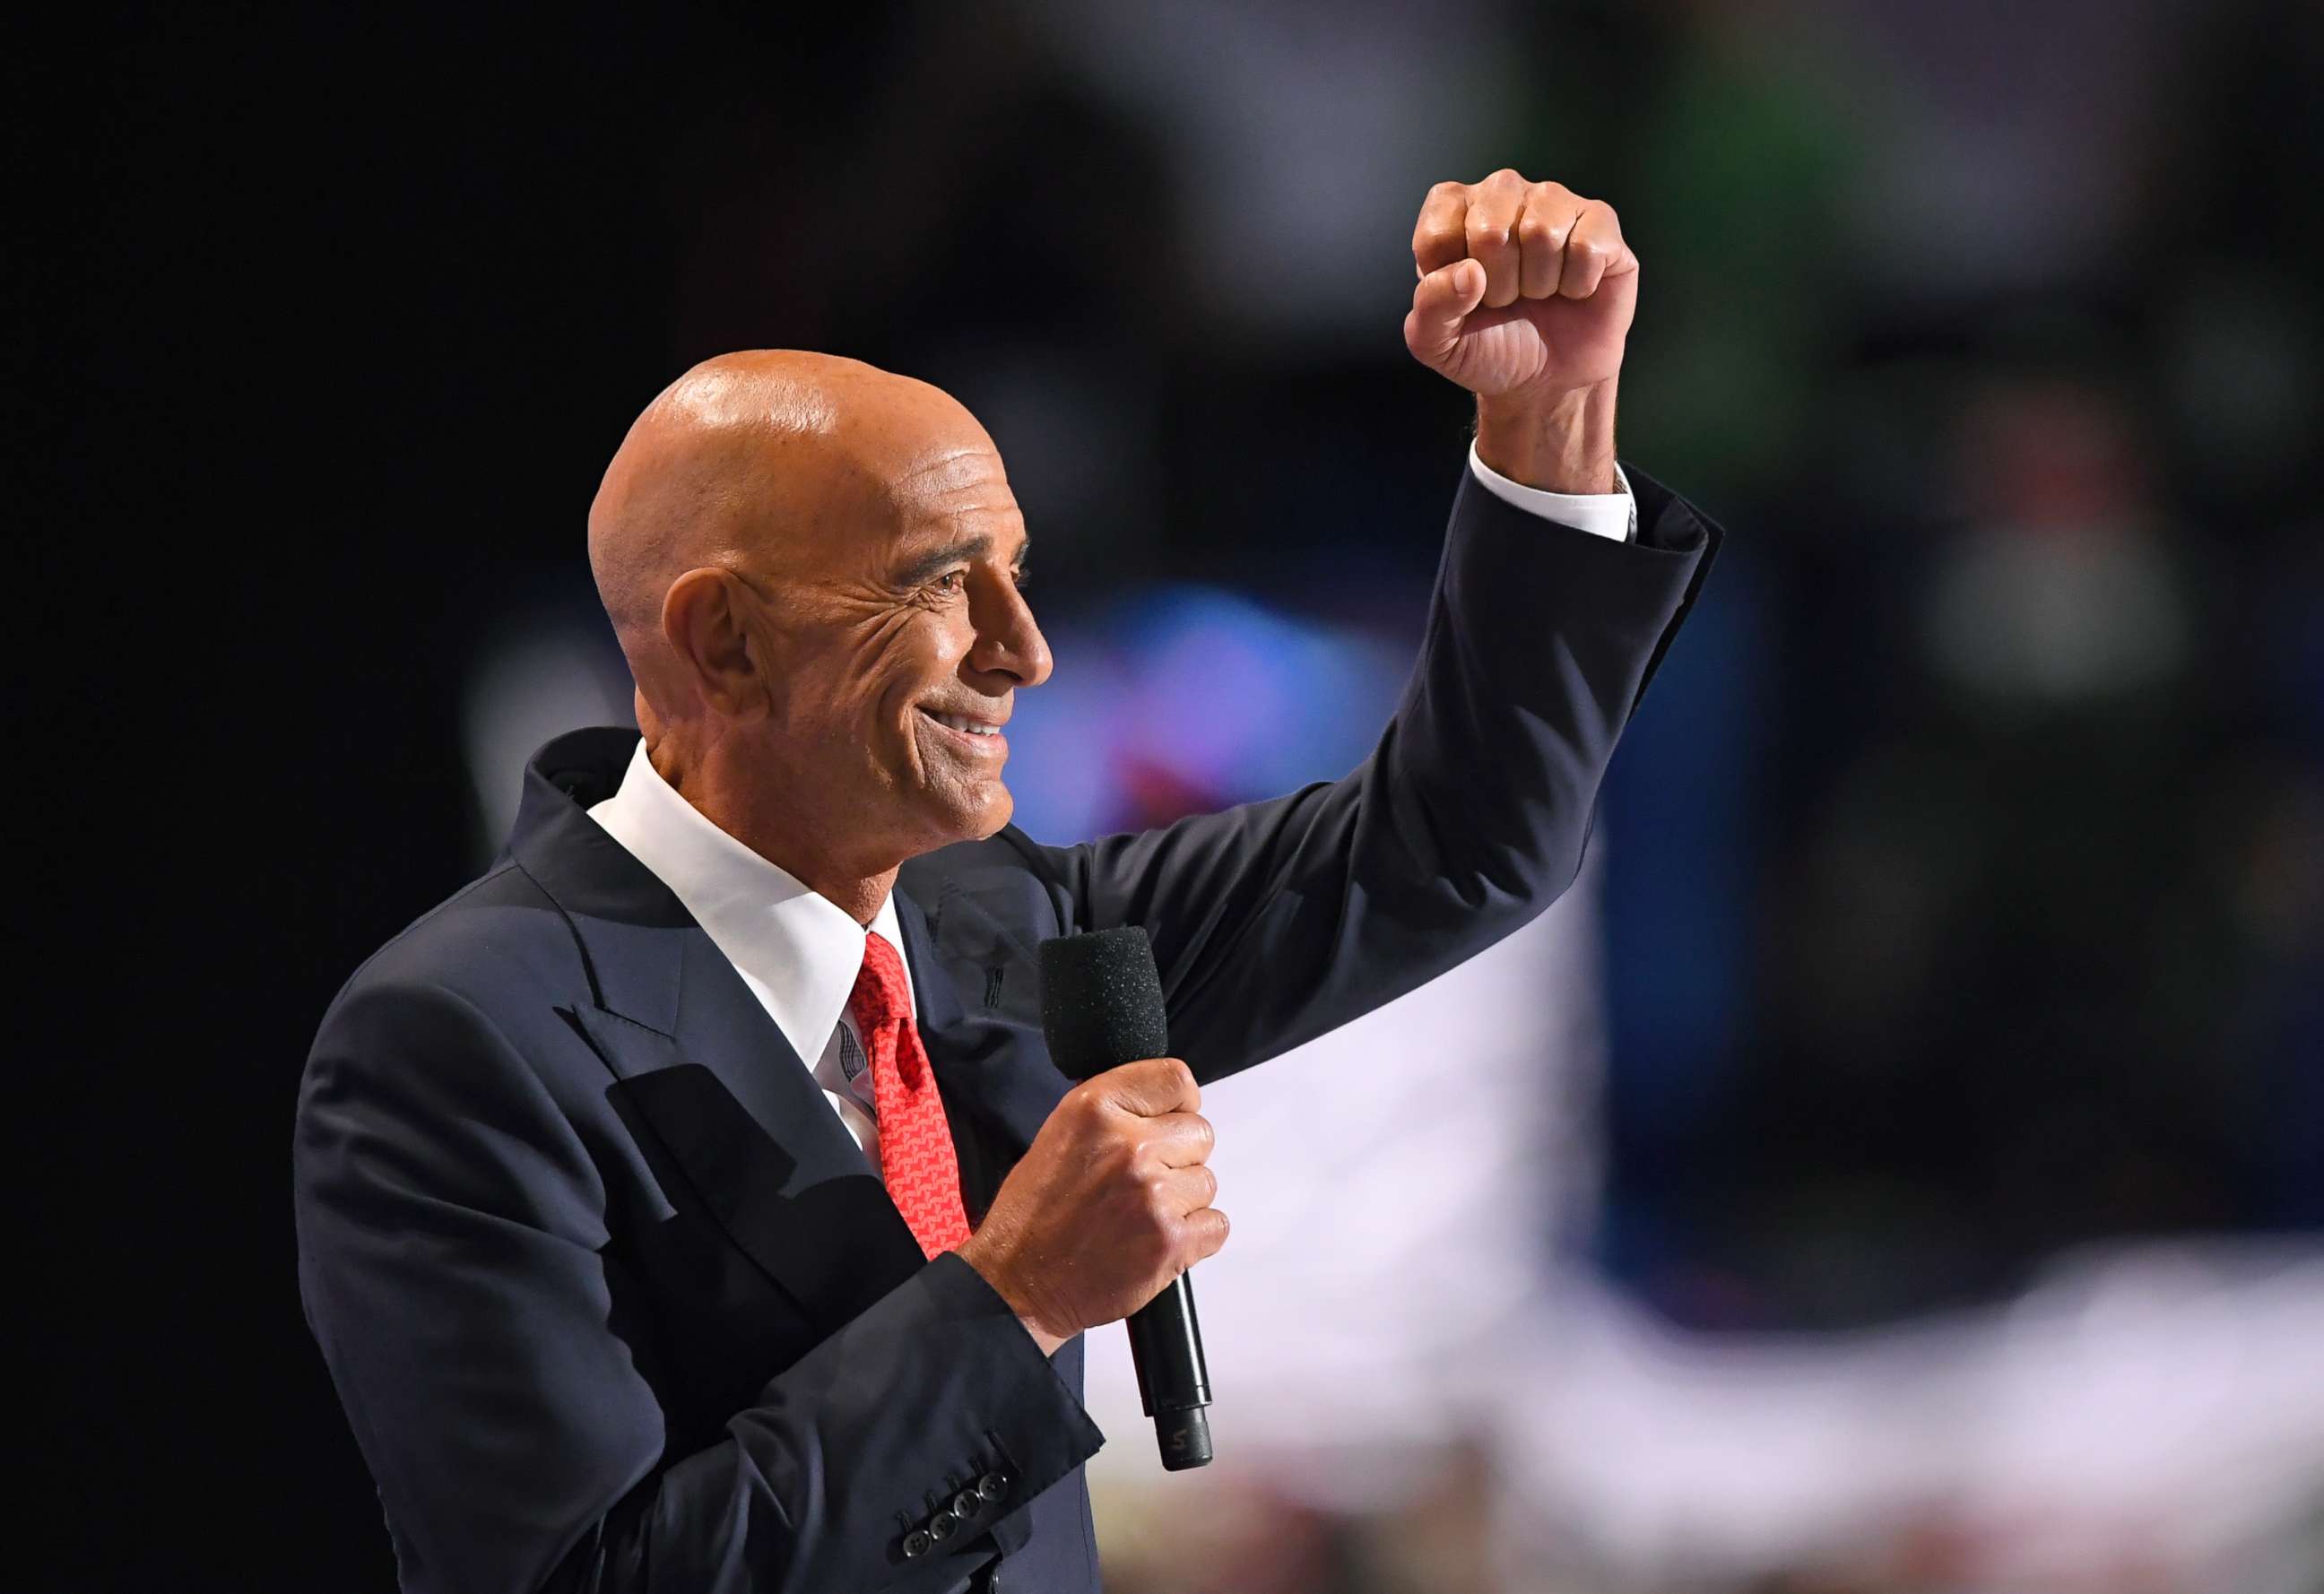 PHOTO: Tom Barrack, CEO of Colony Capital, speaking at the Republican National Convention in Cleveland,Ohio, July 21, 2016.